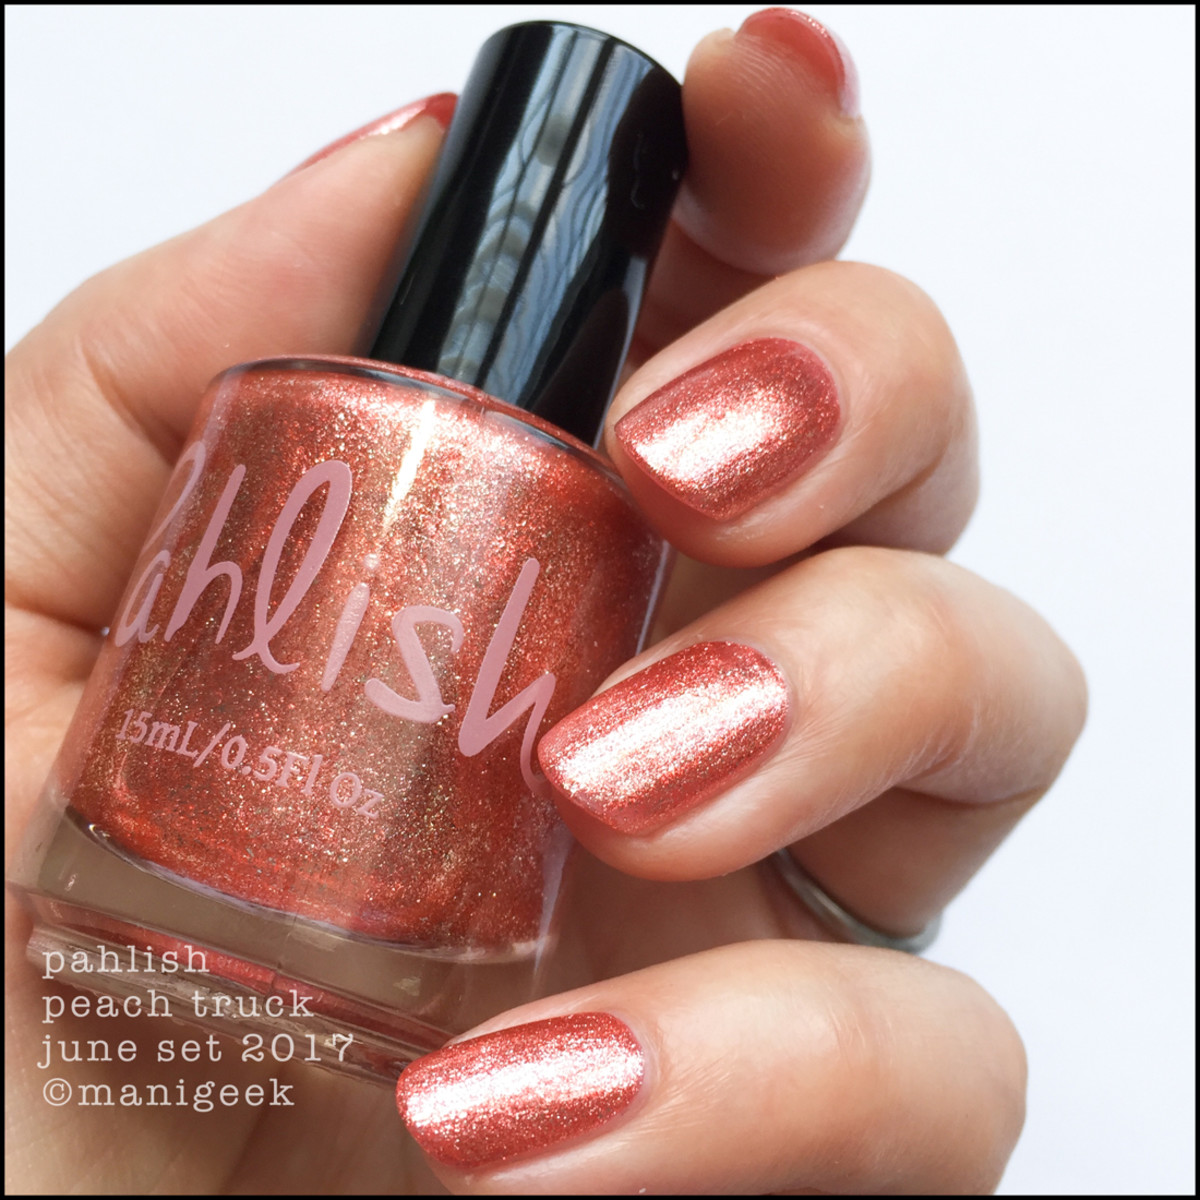 Pahlish Peach Truck - Pahlish June 2017 Collection Swatches